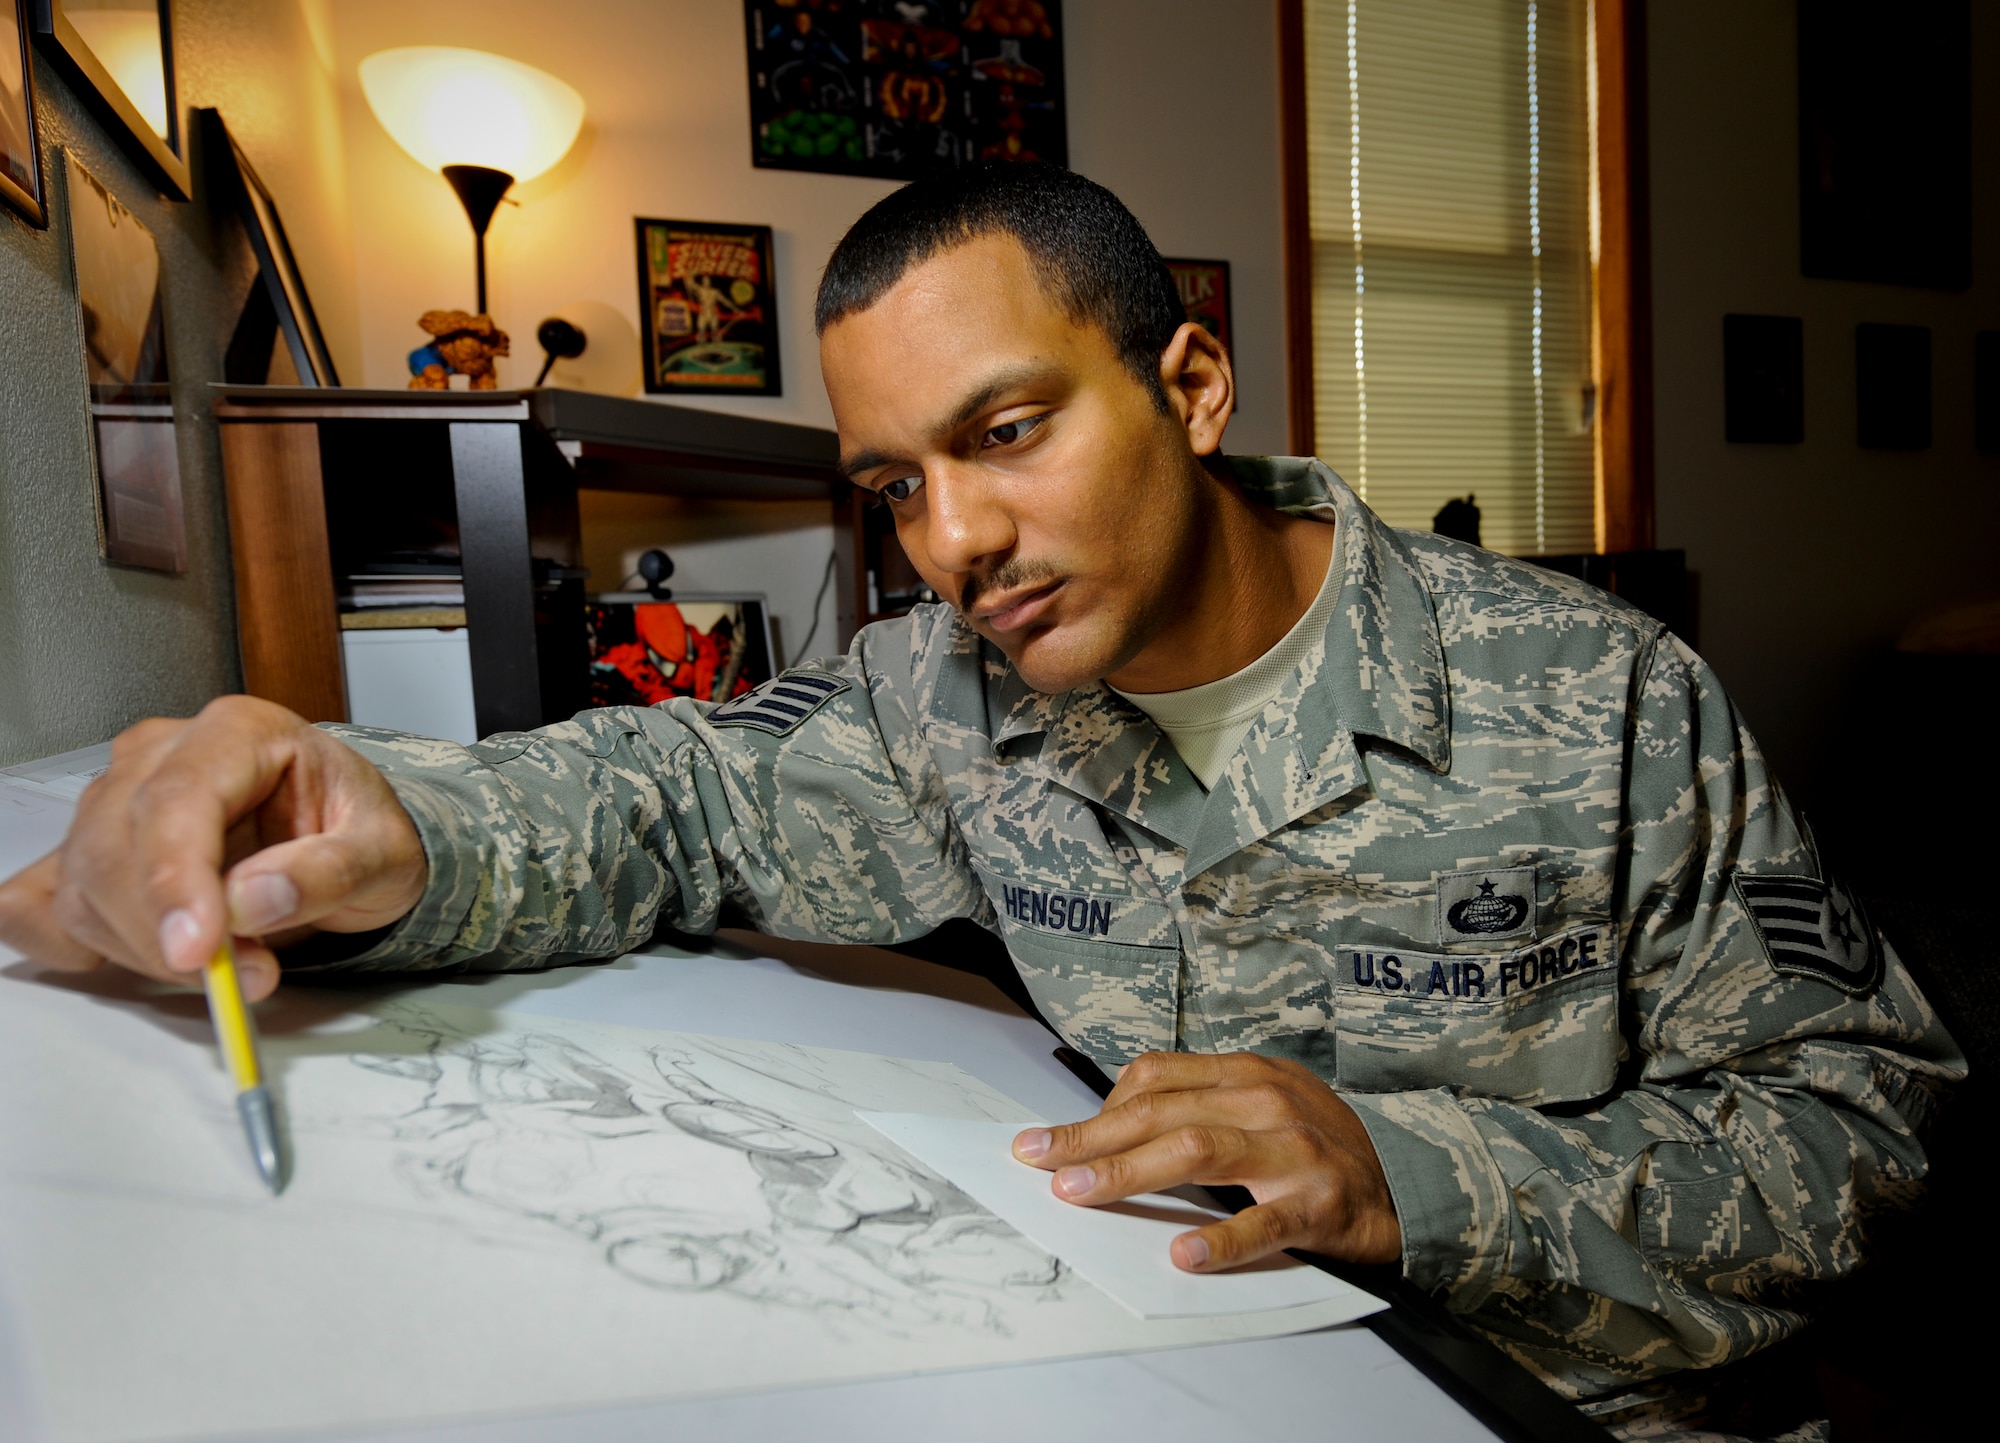 MINOT AIR FORCE BASE, N.D. -- Staff Sgt. Eric Henson, 5th Force Support Squadron base personnel reliability program monitor, works on a sketch of Marvel comics “Spiderman” in his home here Aug. 11. Sergeant Henson has been a comic artist since he was five years old when his father gave him a “Silver Surfer” comic book. (U.S. Air Force photo by Senior Airman Benjamin Stratton)